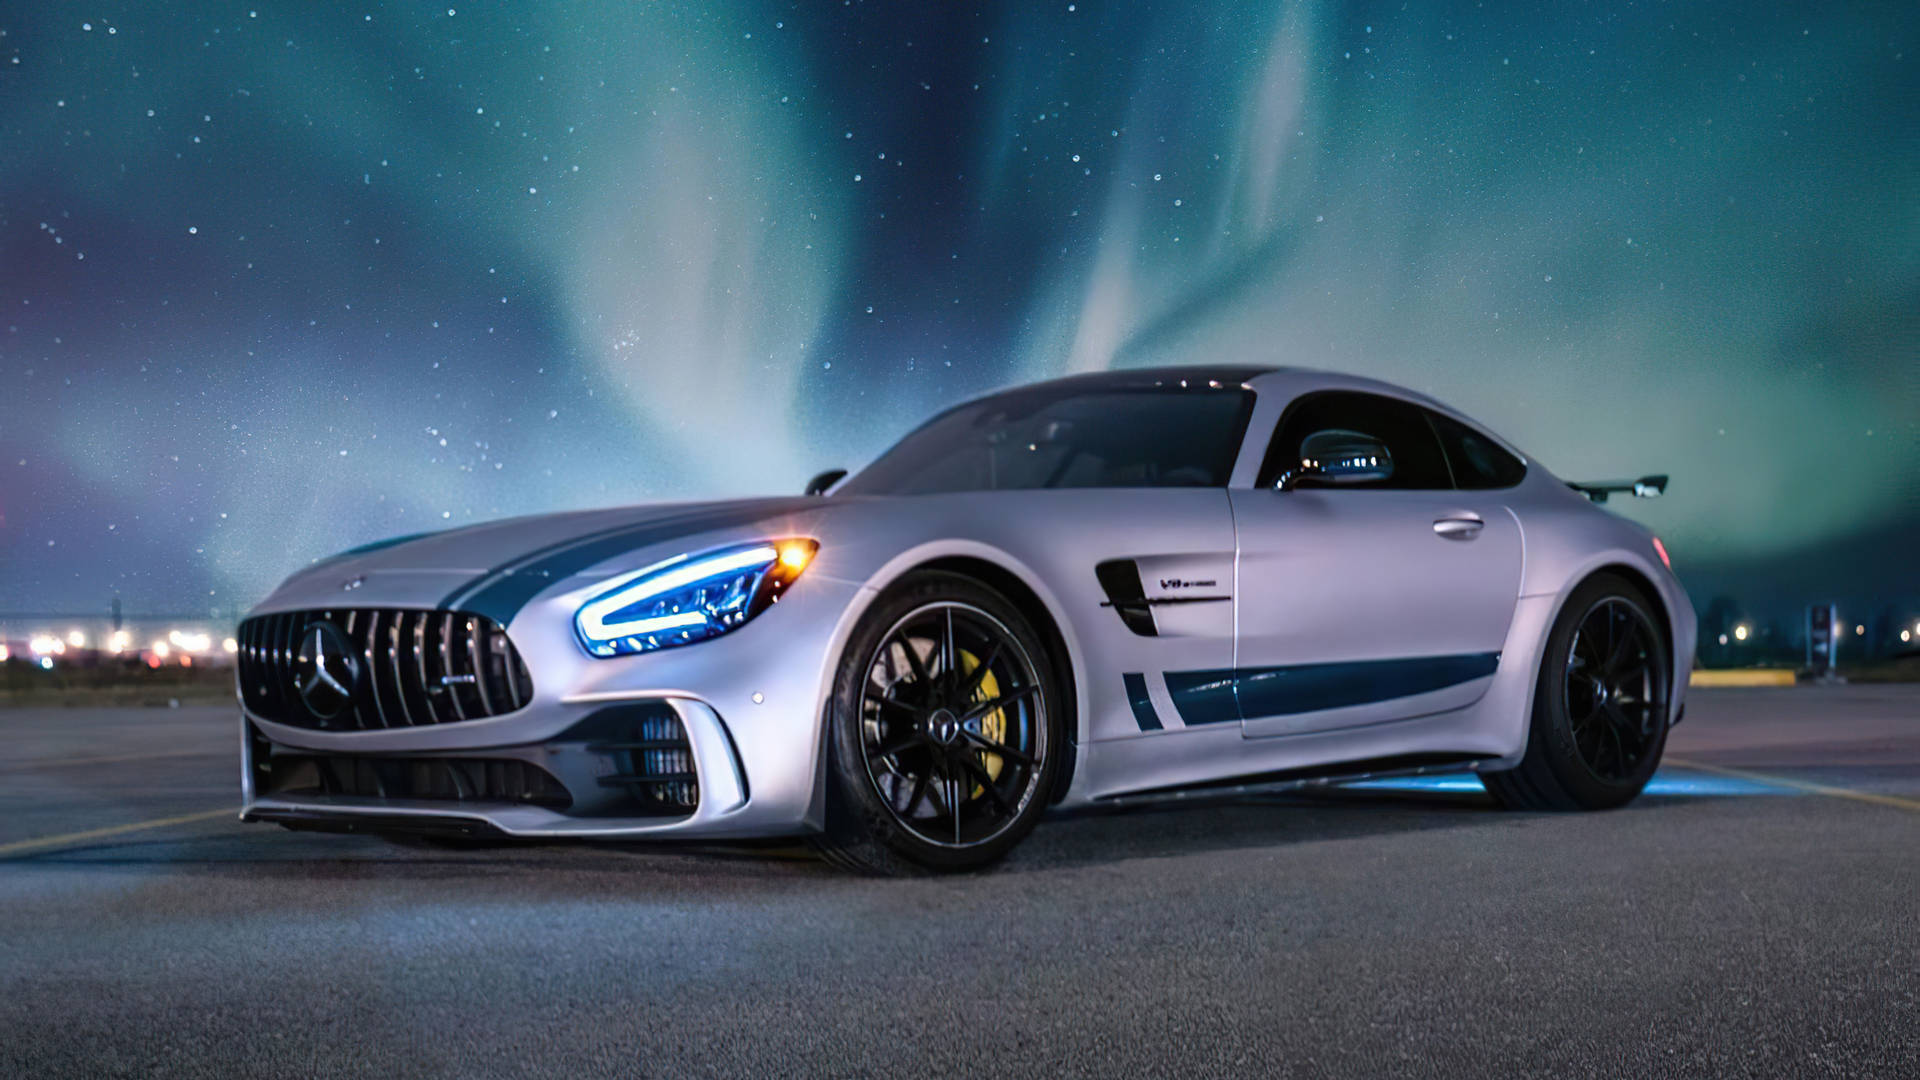 Northern Lights Above Silver AMG Wallpaper